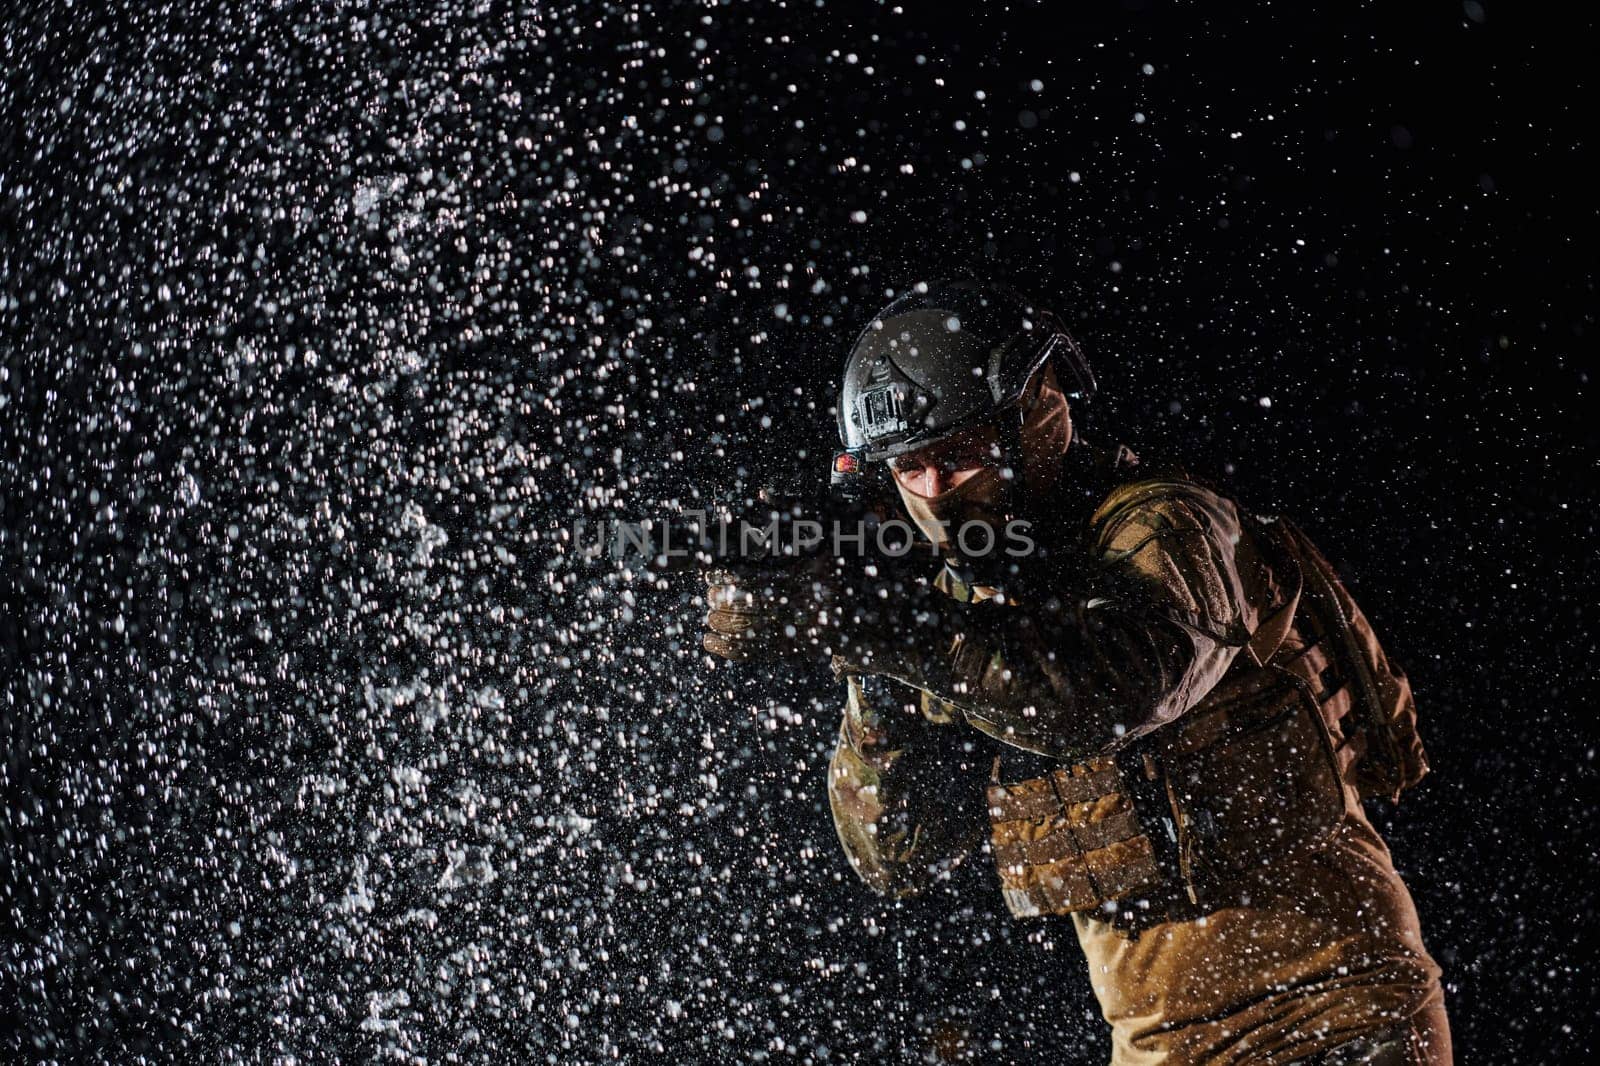 Army soldier in Combat Uniforms with an assault rifle, plate carrier and combat helmet going on a dangerous mission on a rainy night